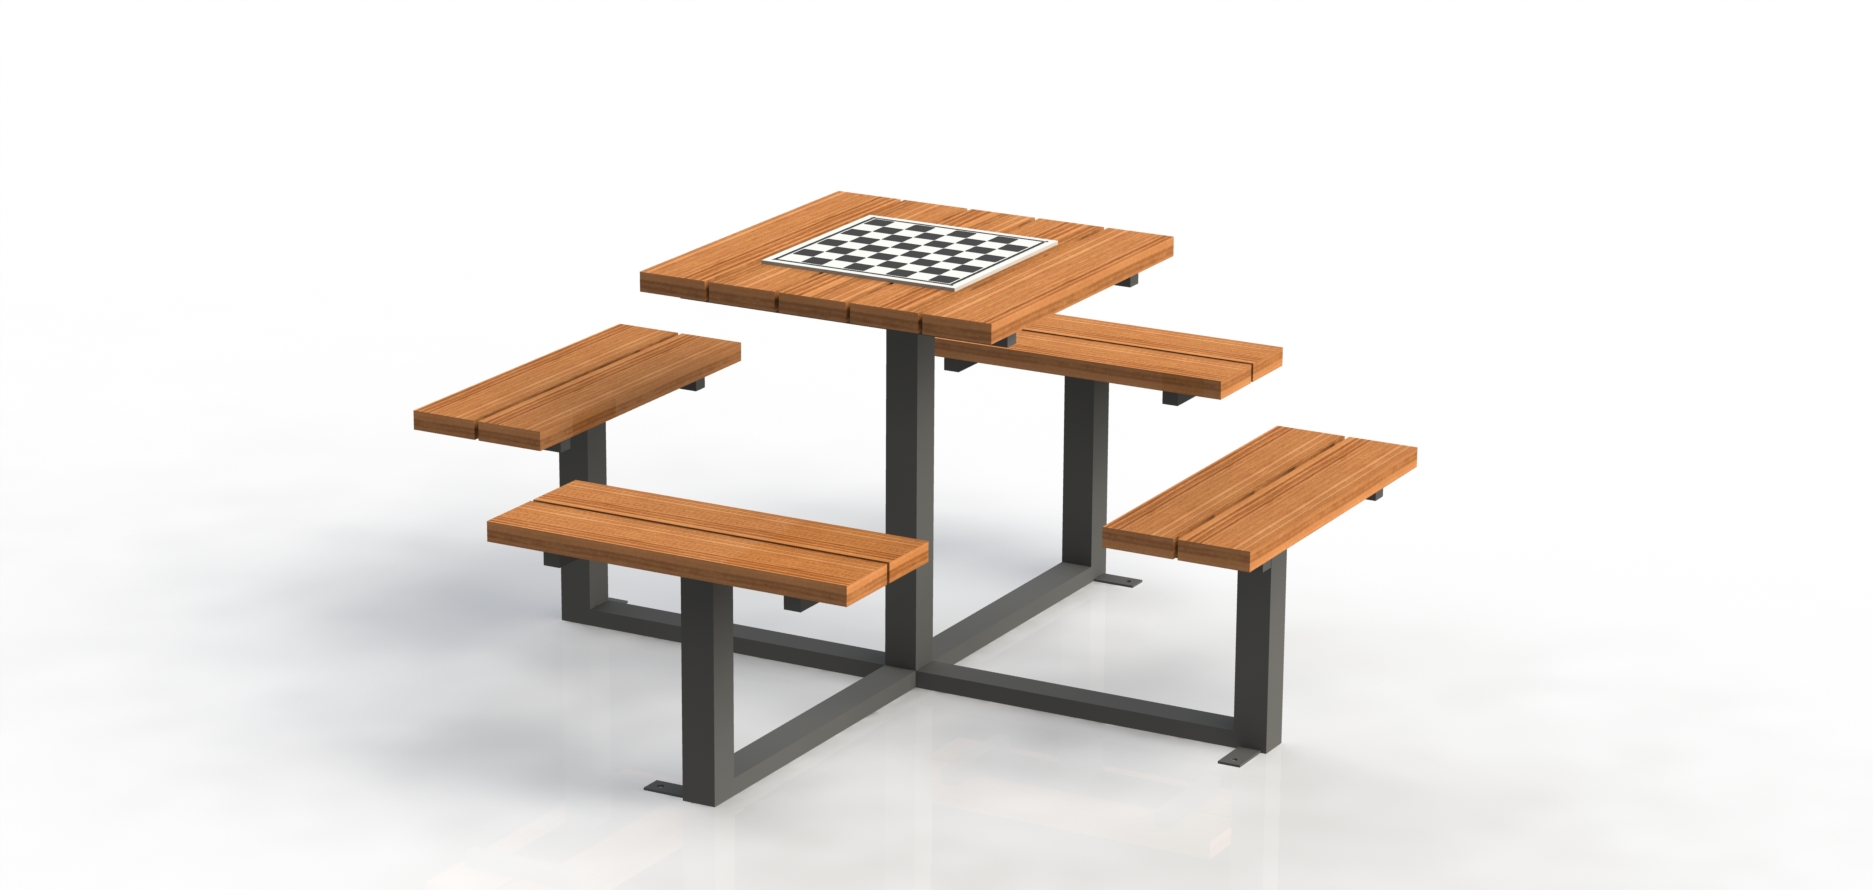 Product photo: Chess table with four seats